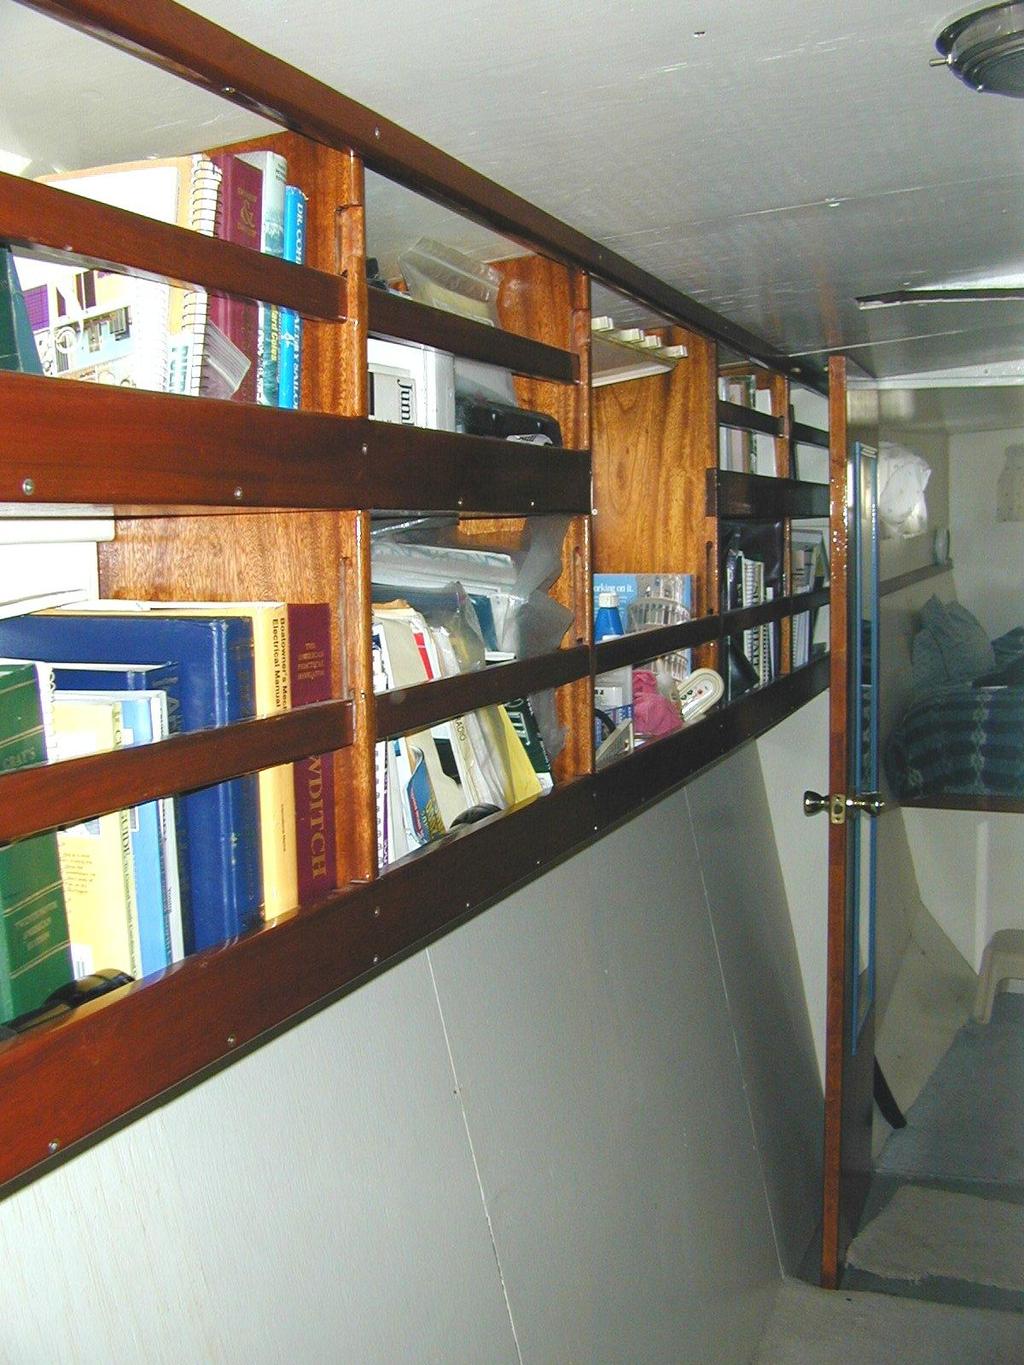 This is an old picture looking aft through the starboard side midships passageway and library toward the master cabin.